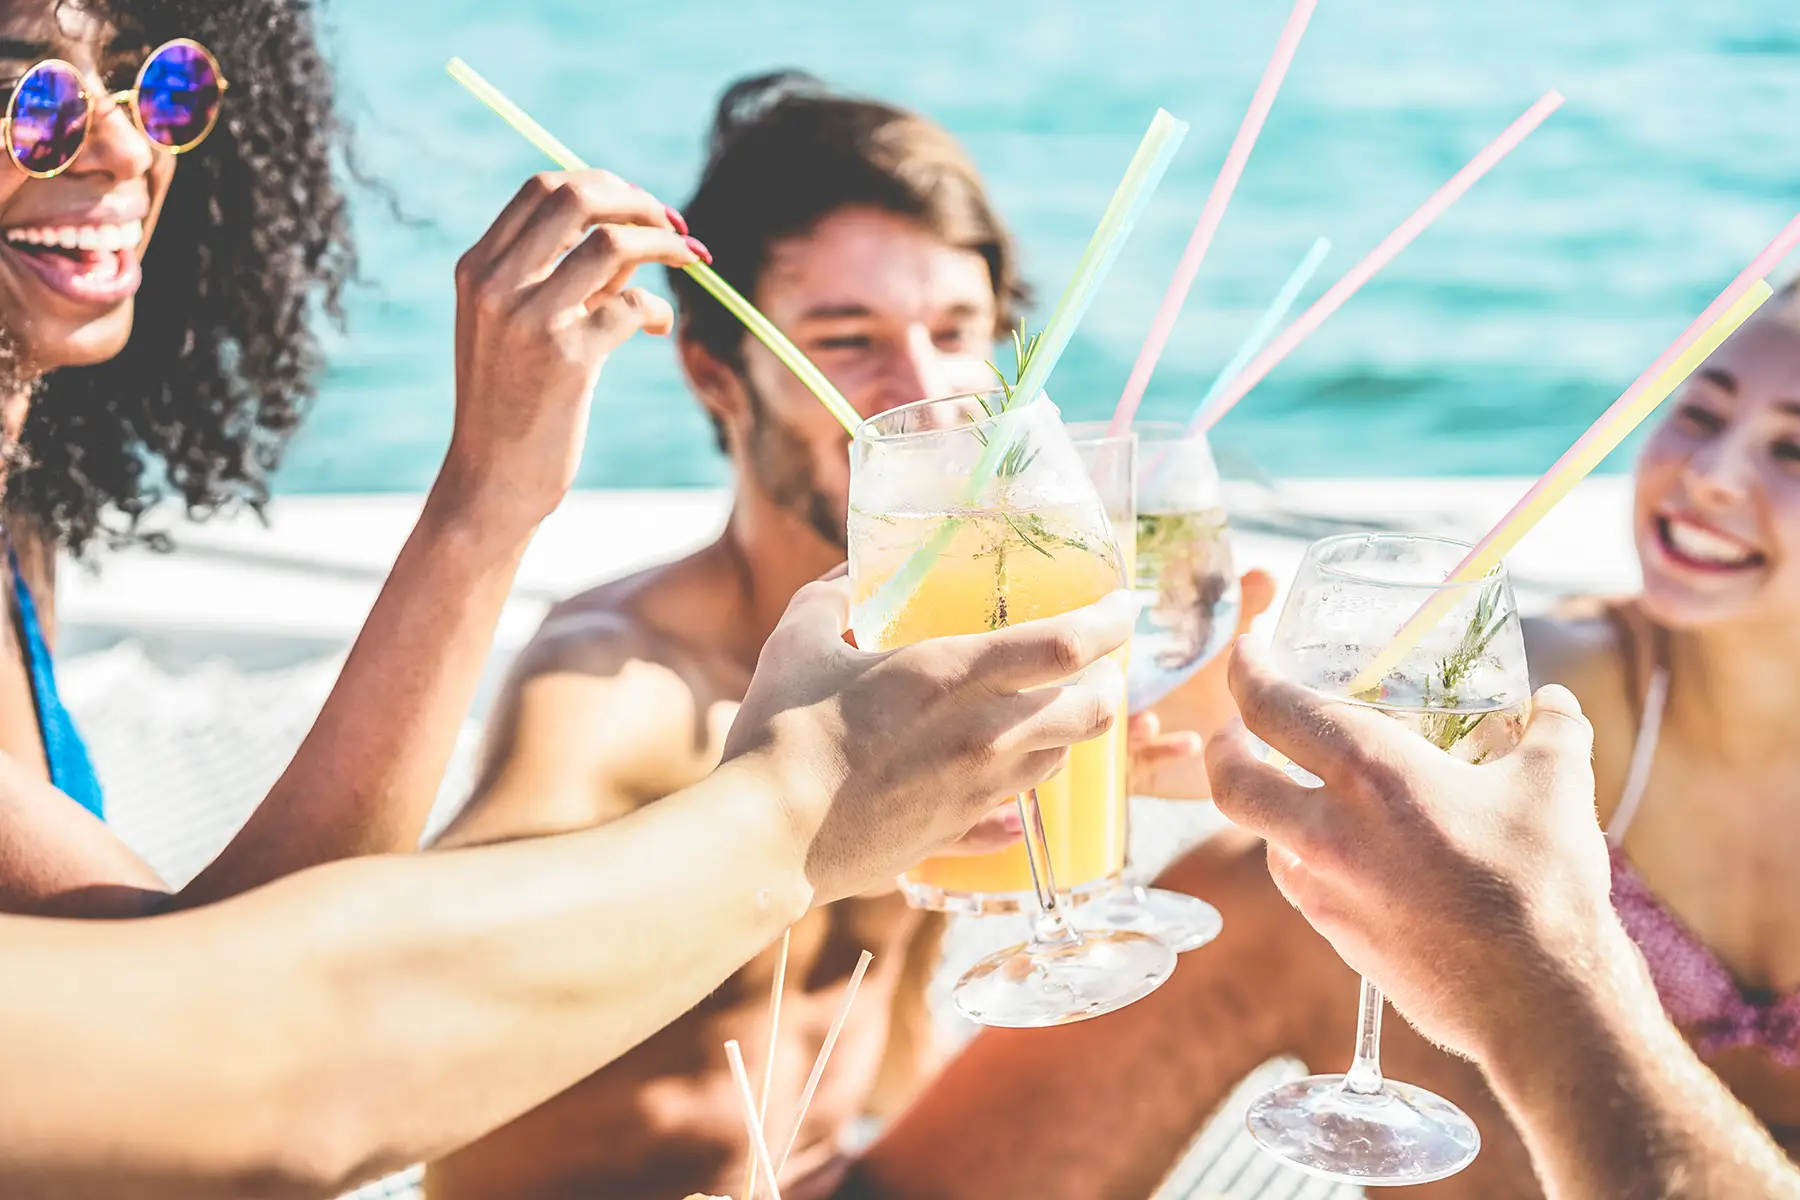 Saying 'cheers' in the Pacific with tropical drinks